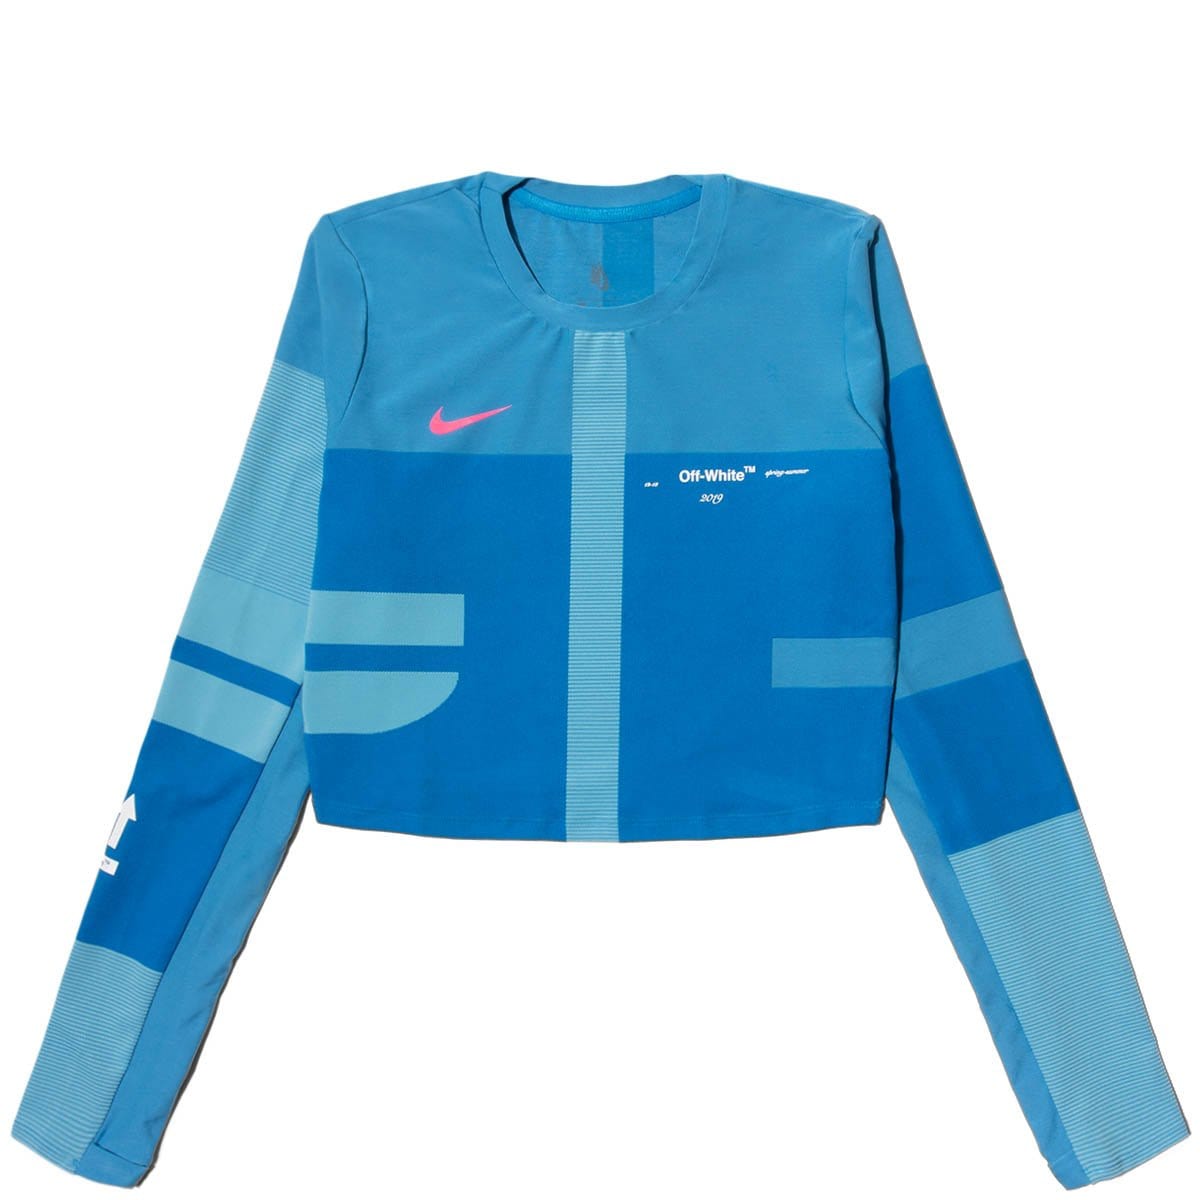 off white nike outfit womens